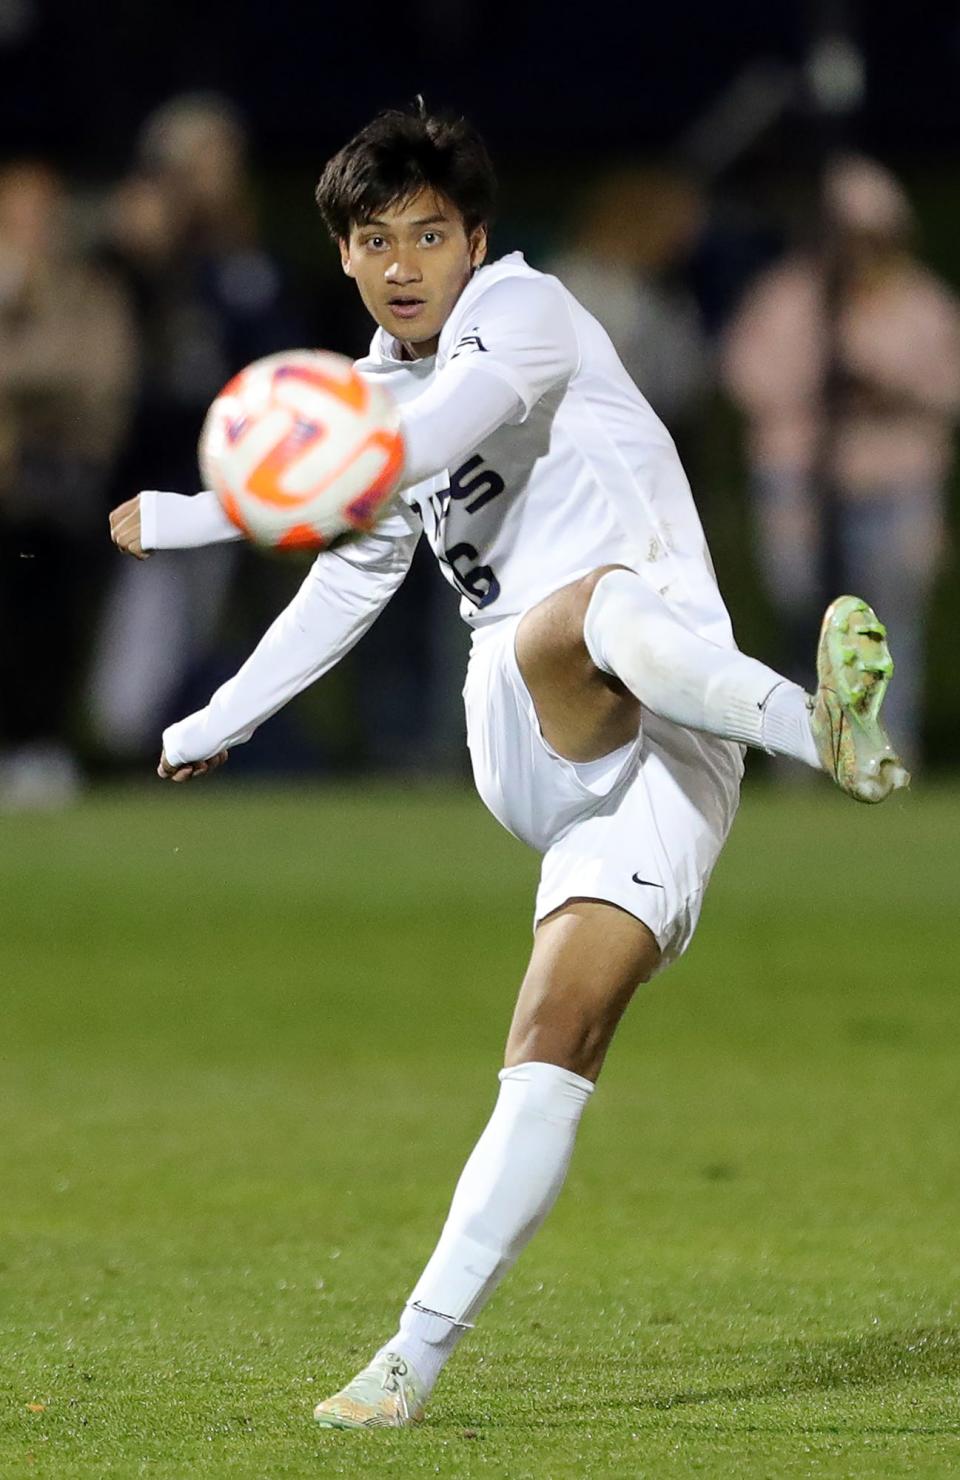 Akron midfielder Wan Kuzri Wan Kamal (16) sends the ball down the field during the second half of an NCAA soccer match against the Duquesne Dukes, Wednesday, Sept. 28, 2022, in Akron, Ohio.